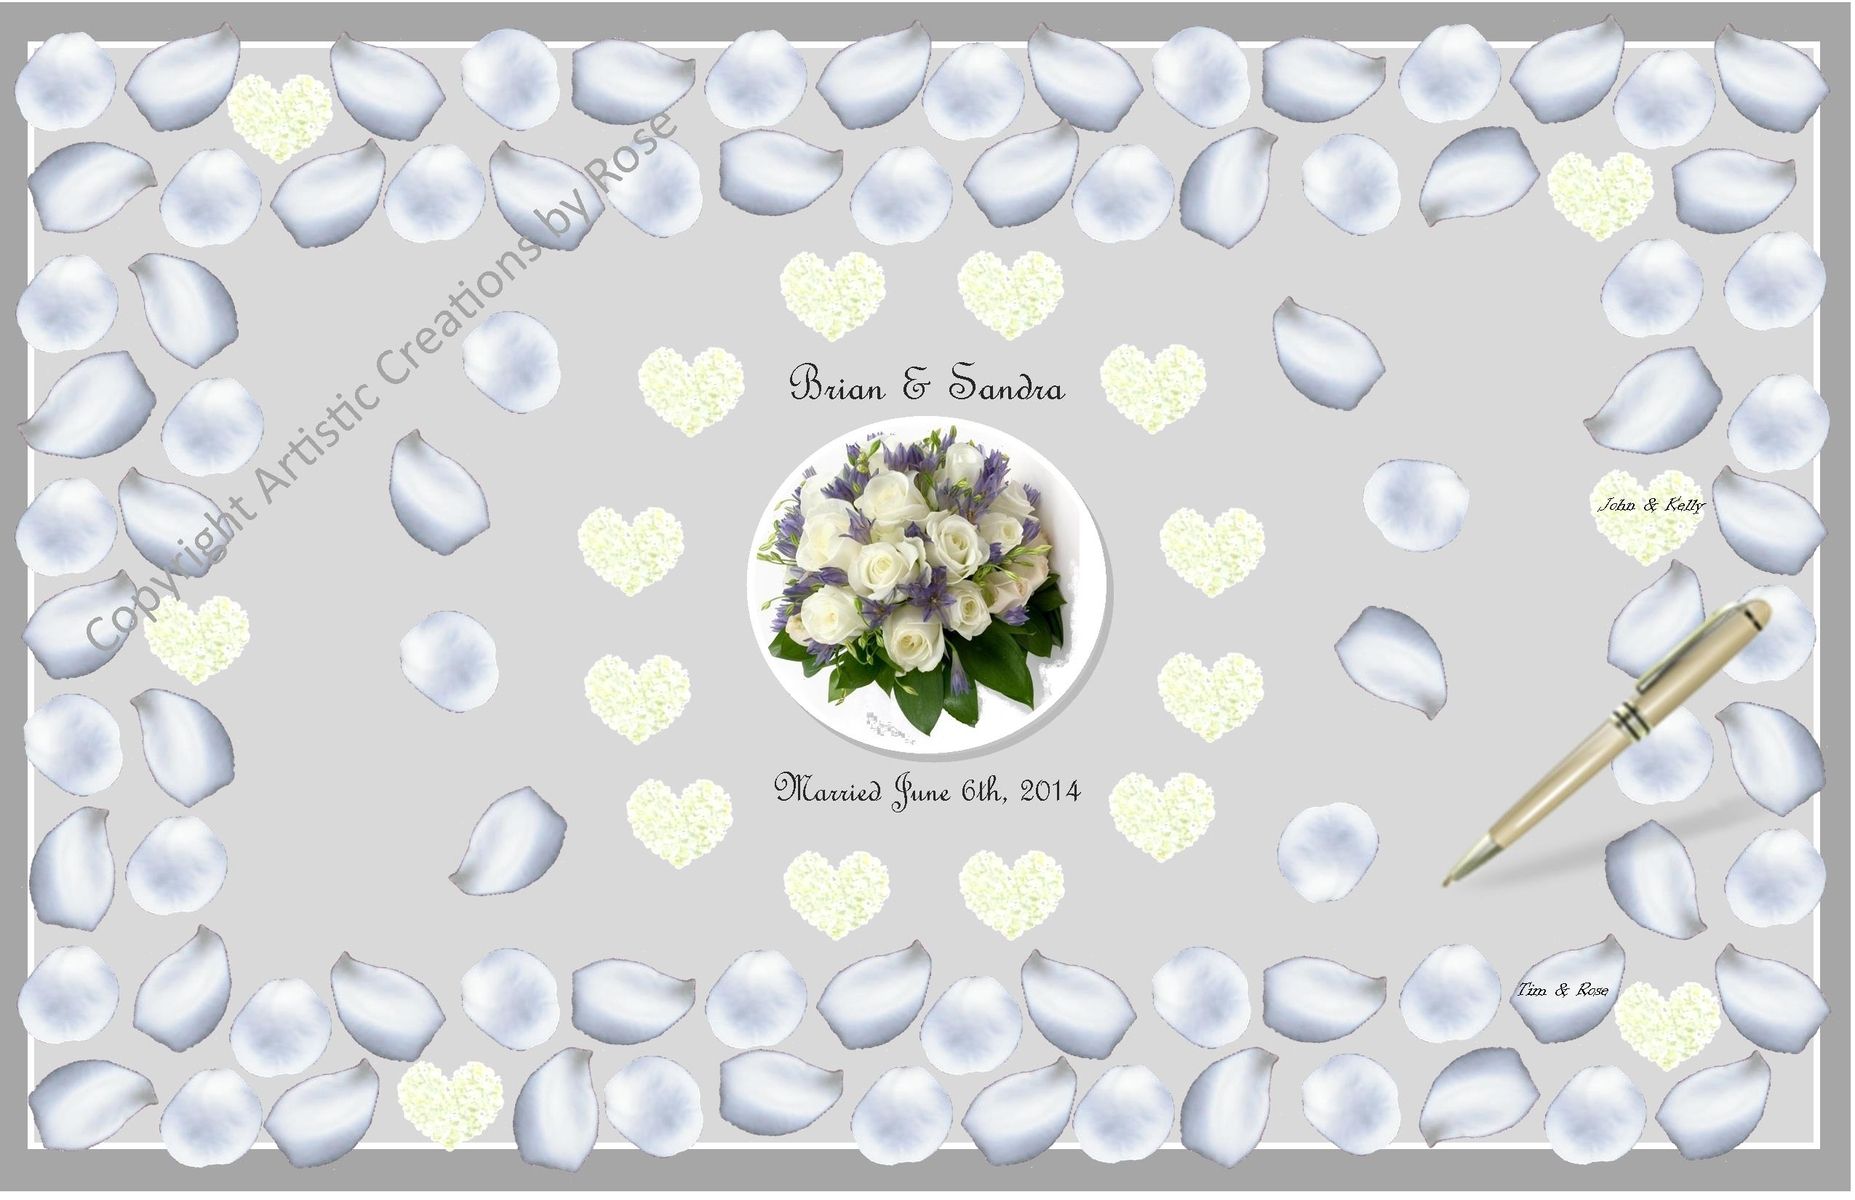 Details about   PERSONALISED HANDMADE WEDDING GUEST BOOK REAL FLOWER PETALS DESIGN NEW IN BOX 